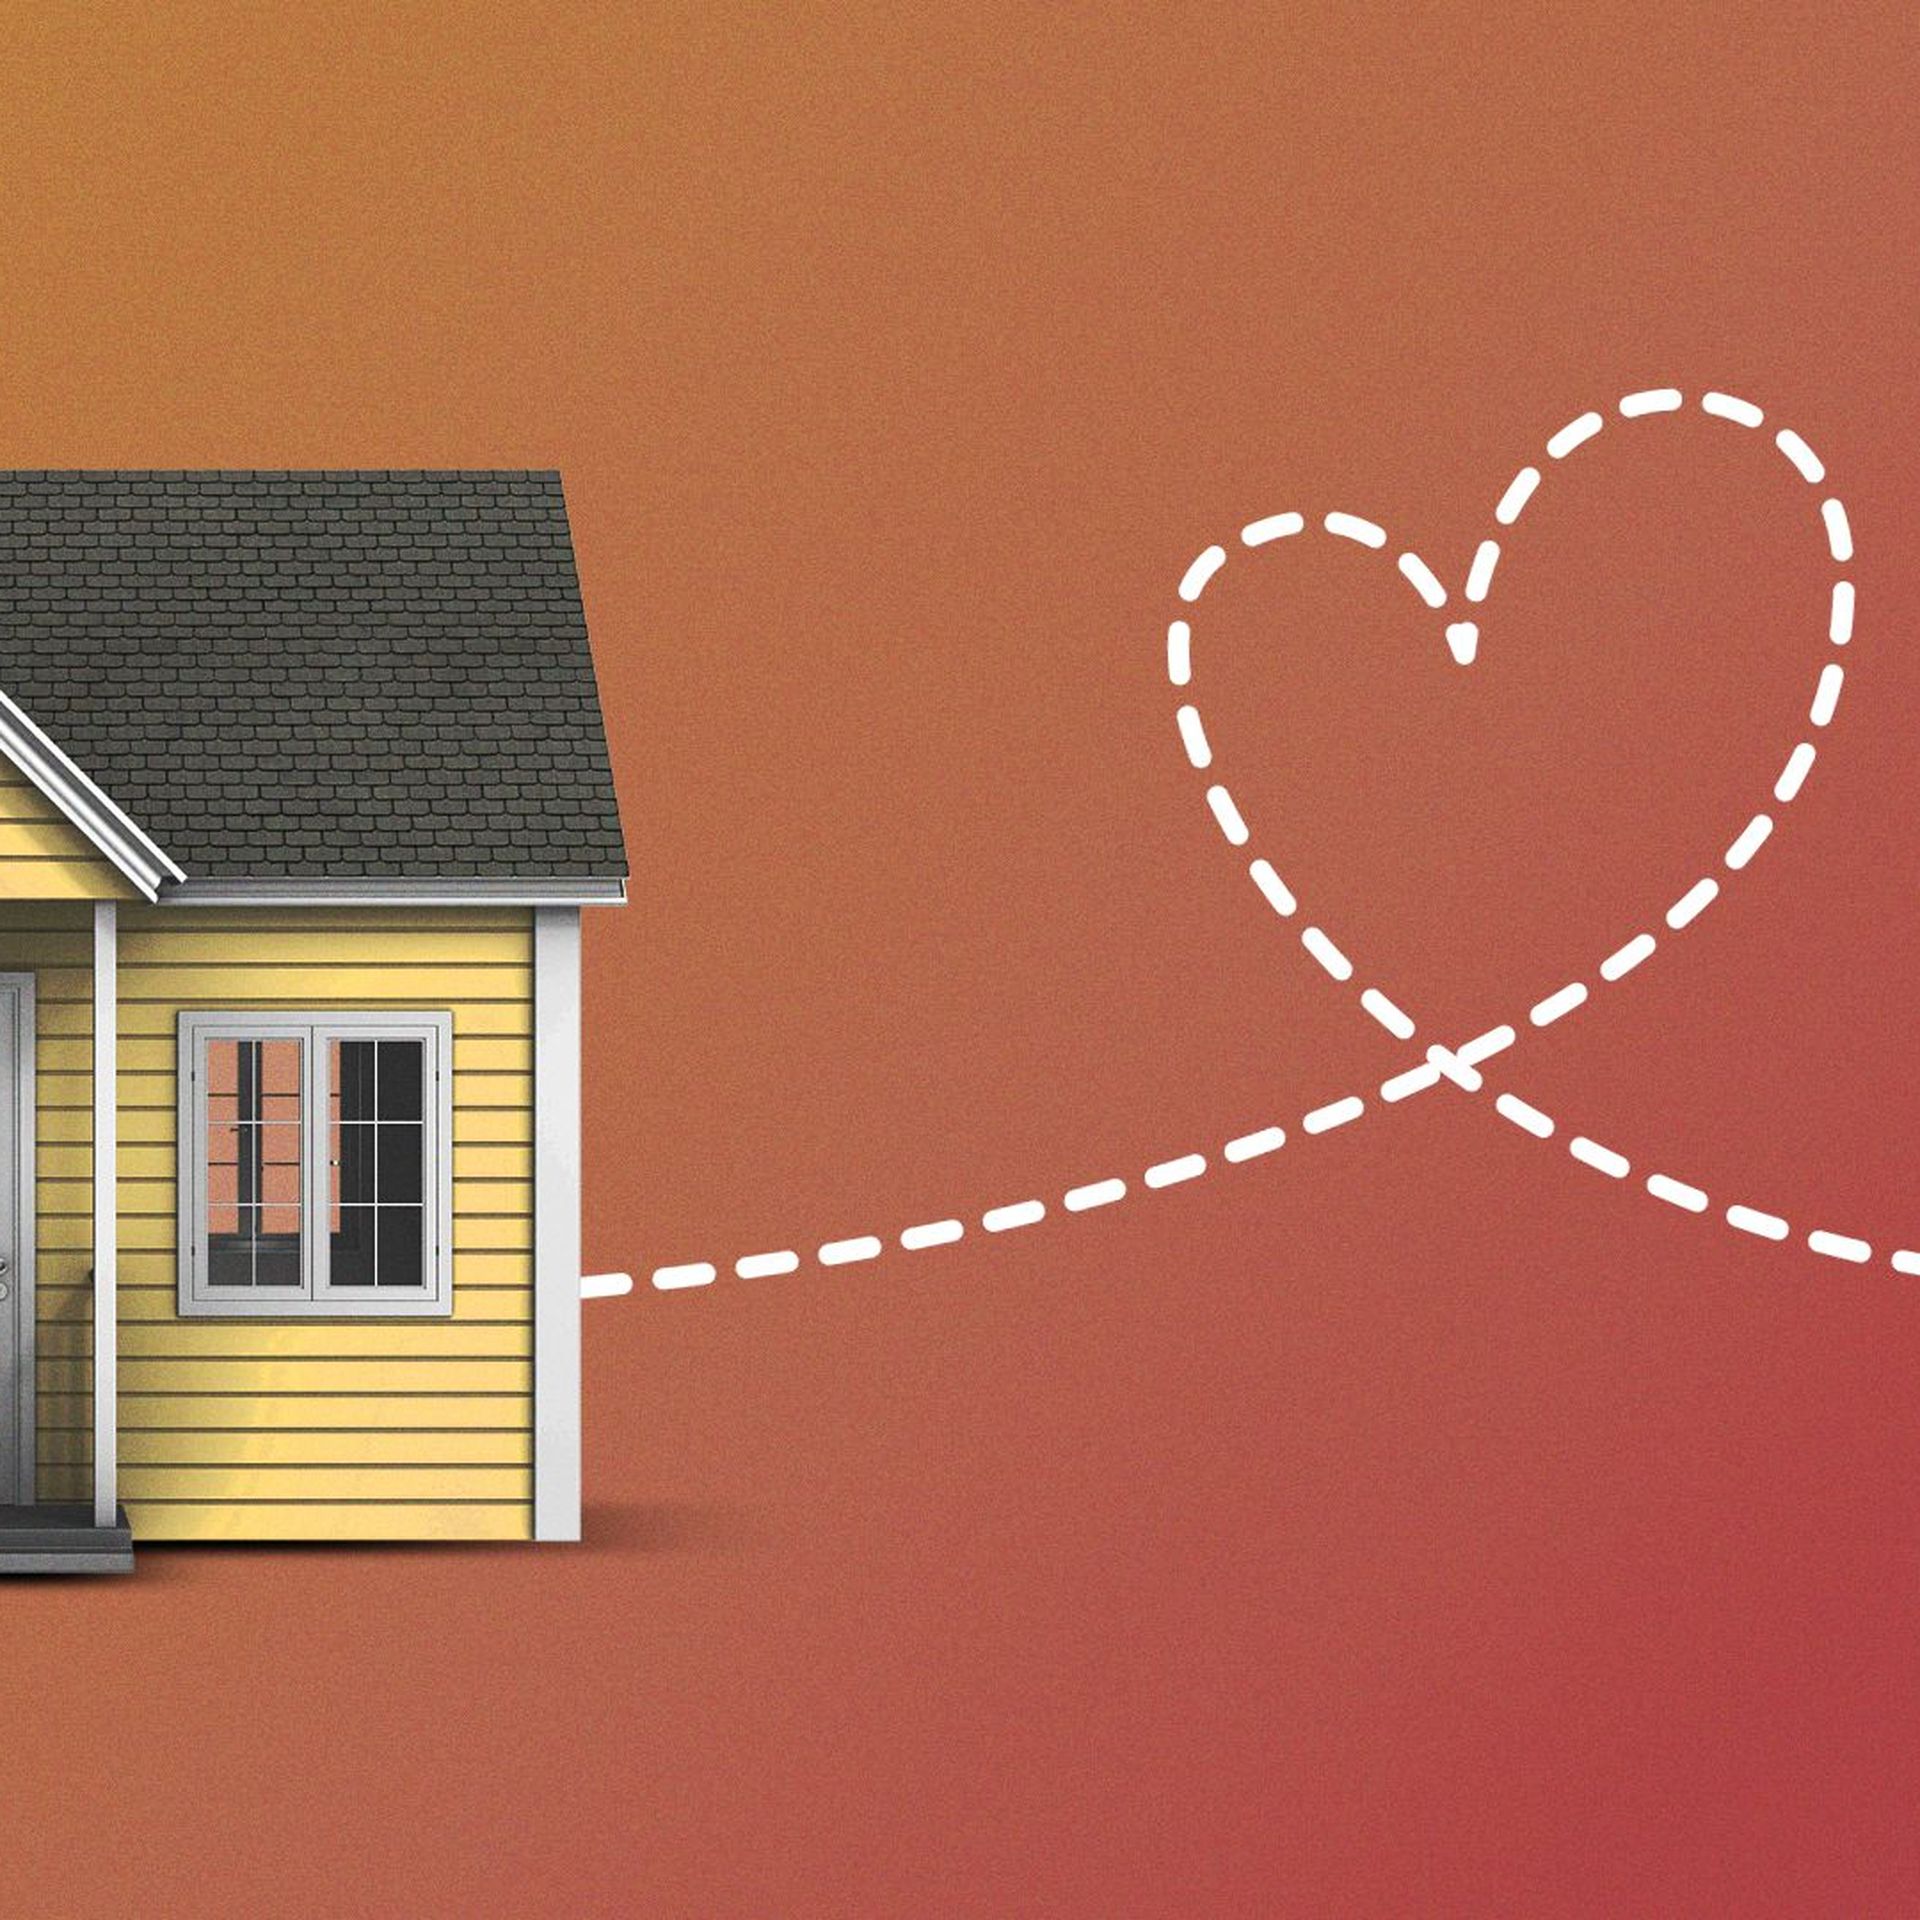 Illustration of two houses in a neighborhood connected by a dotted heart. 